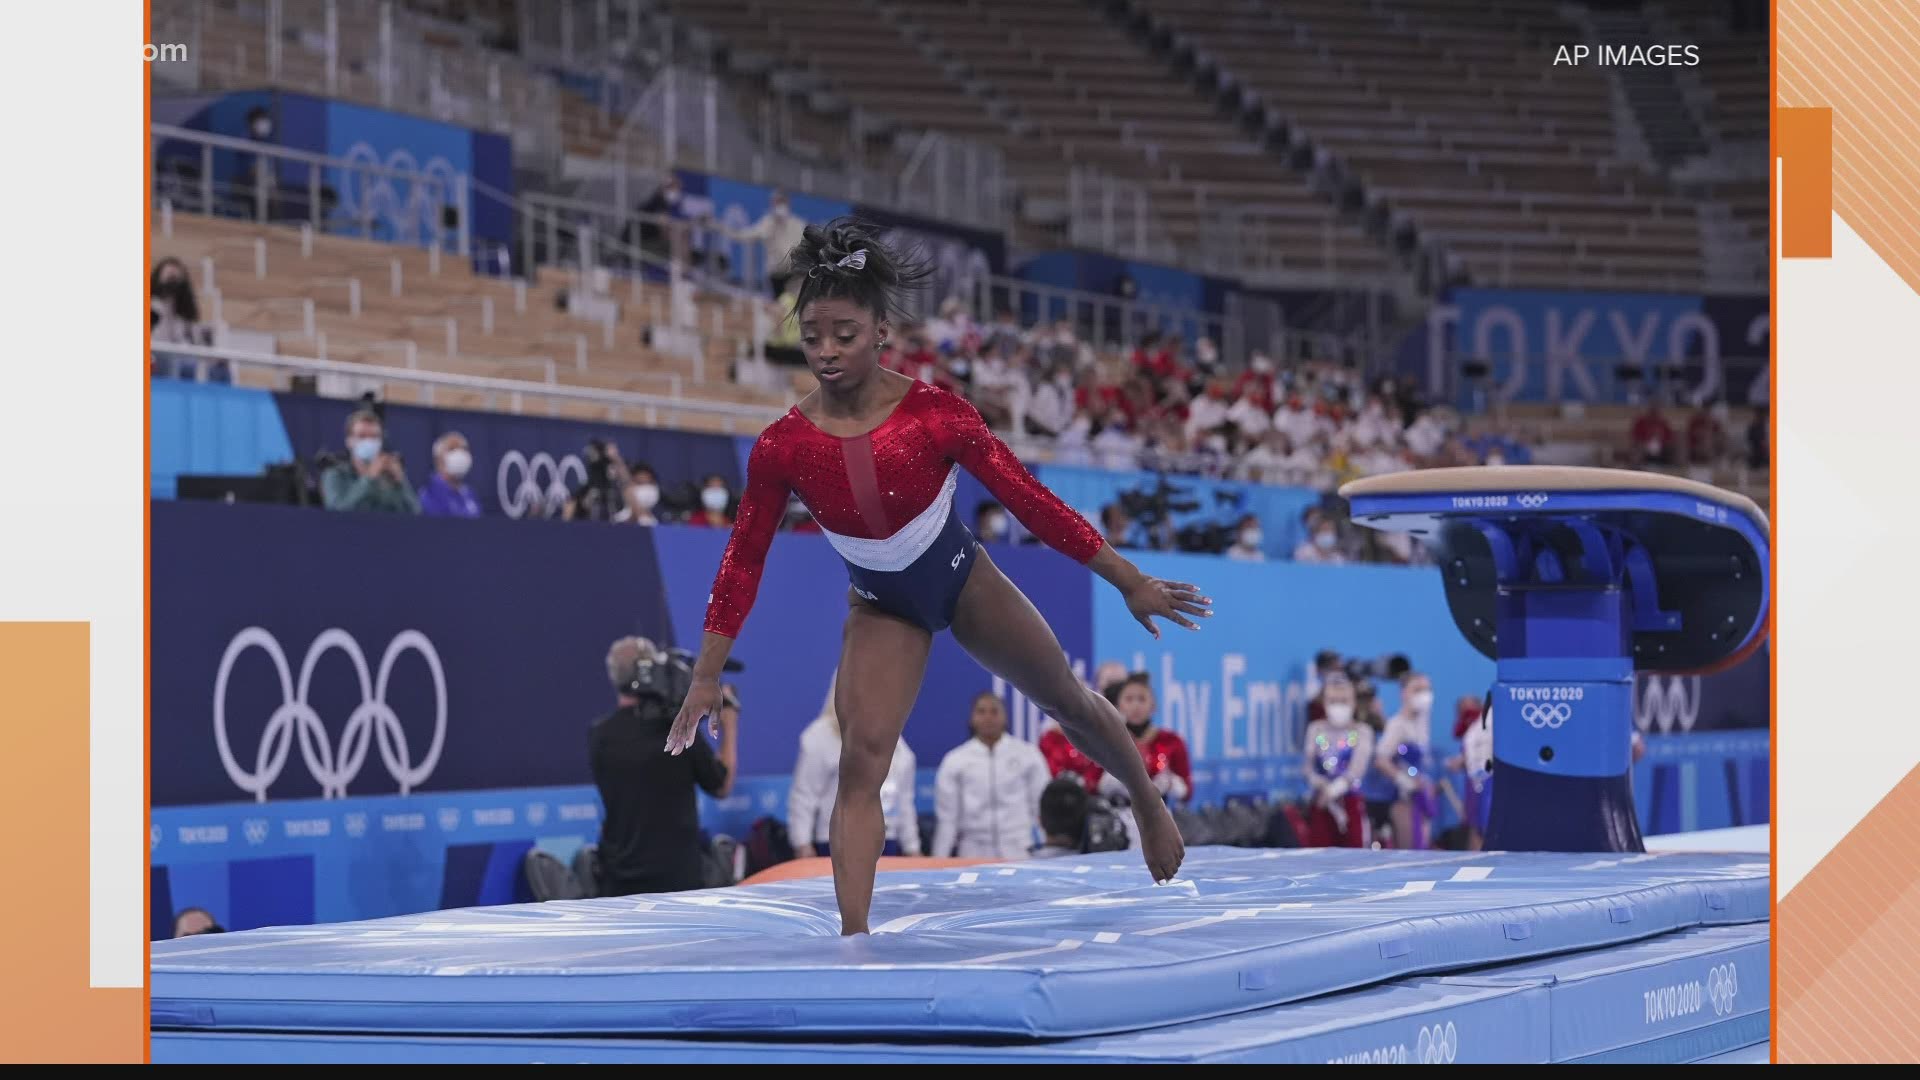 Reigning Olympic gymnastics champion Simone Biles is out of the team finals. It happened after a huddle with a trainer after landing her vault.